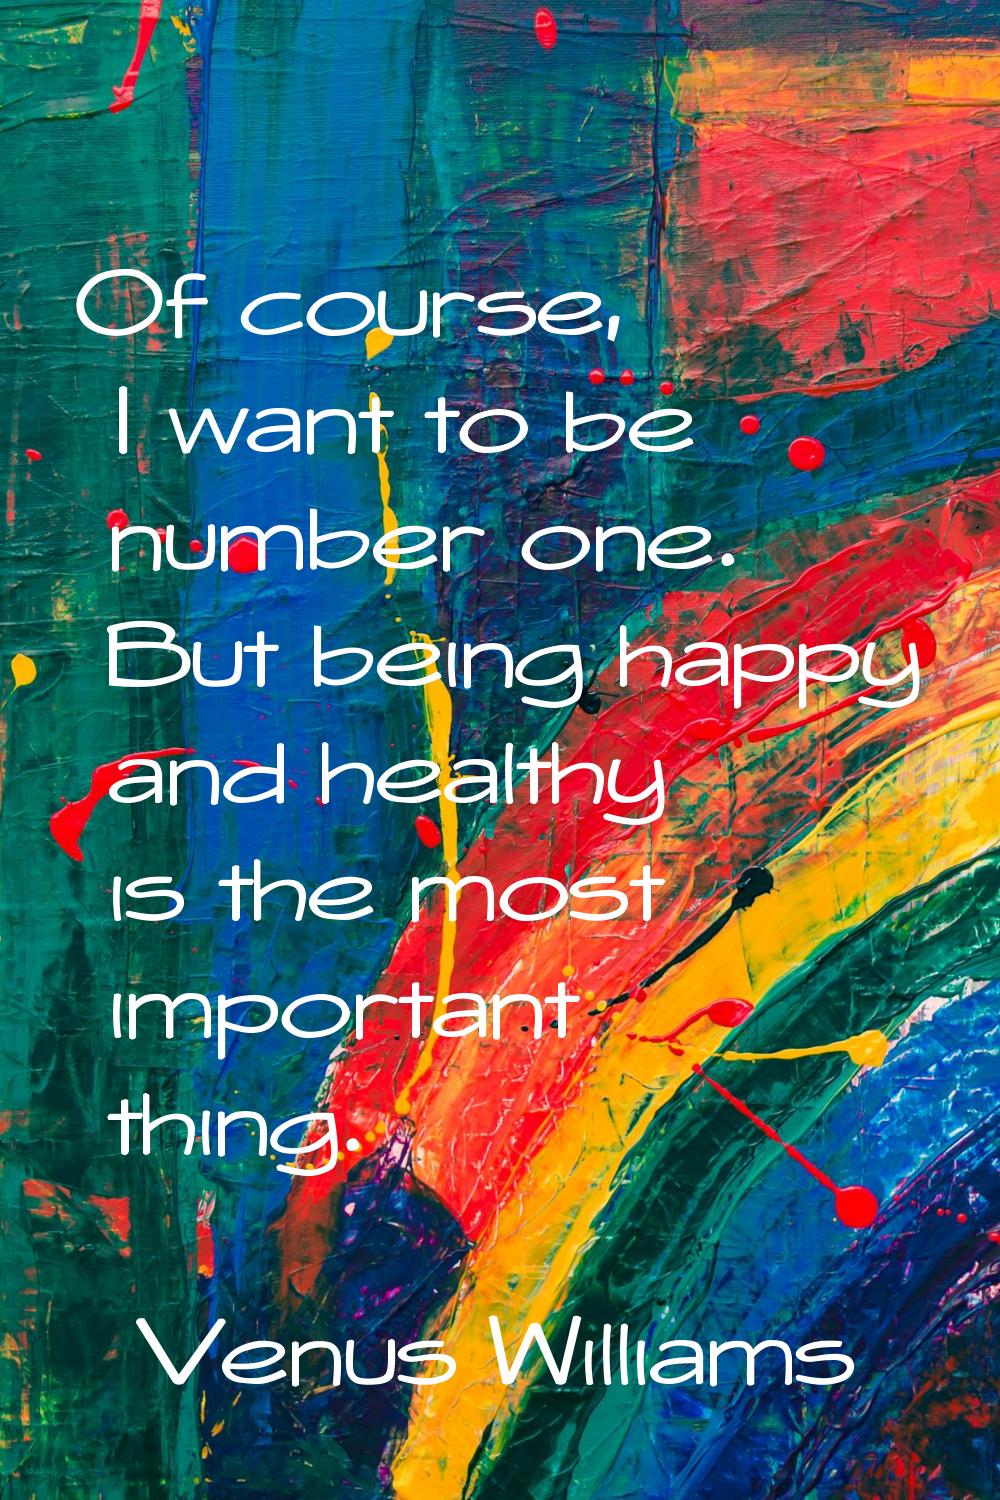 Of course, I want to be number one. But being happy and healthy is the most important thing.